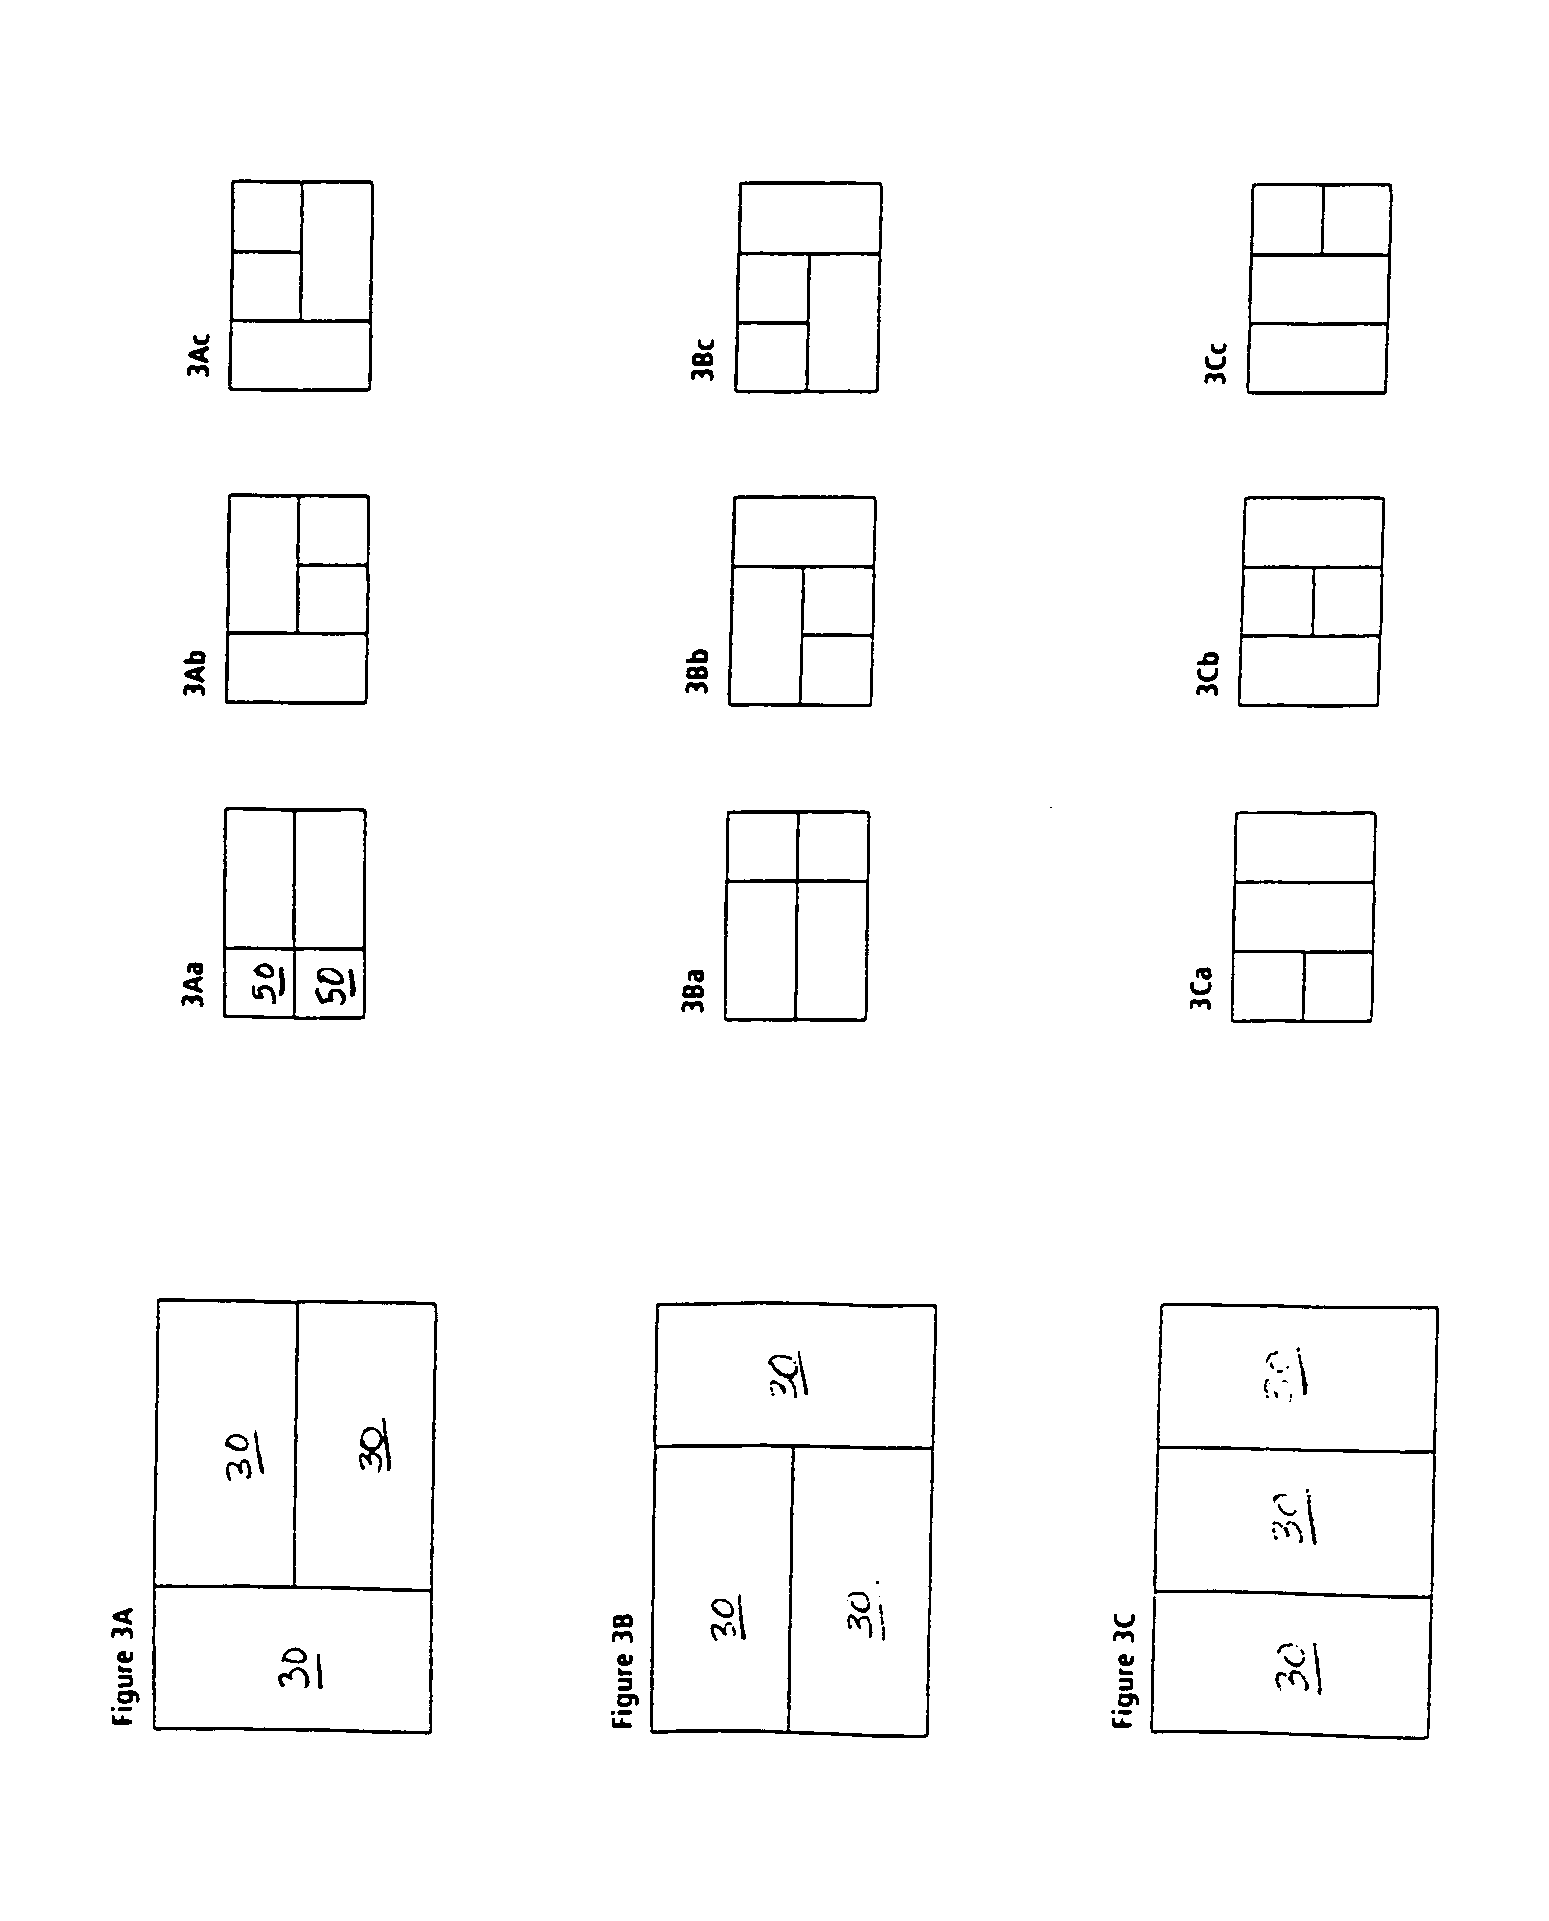 Method and system for computer screen layout based on a recombinant geometric modular structure